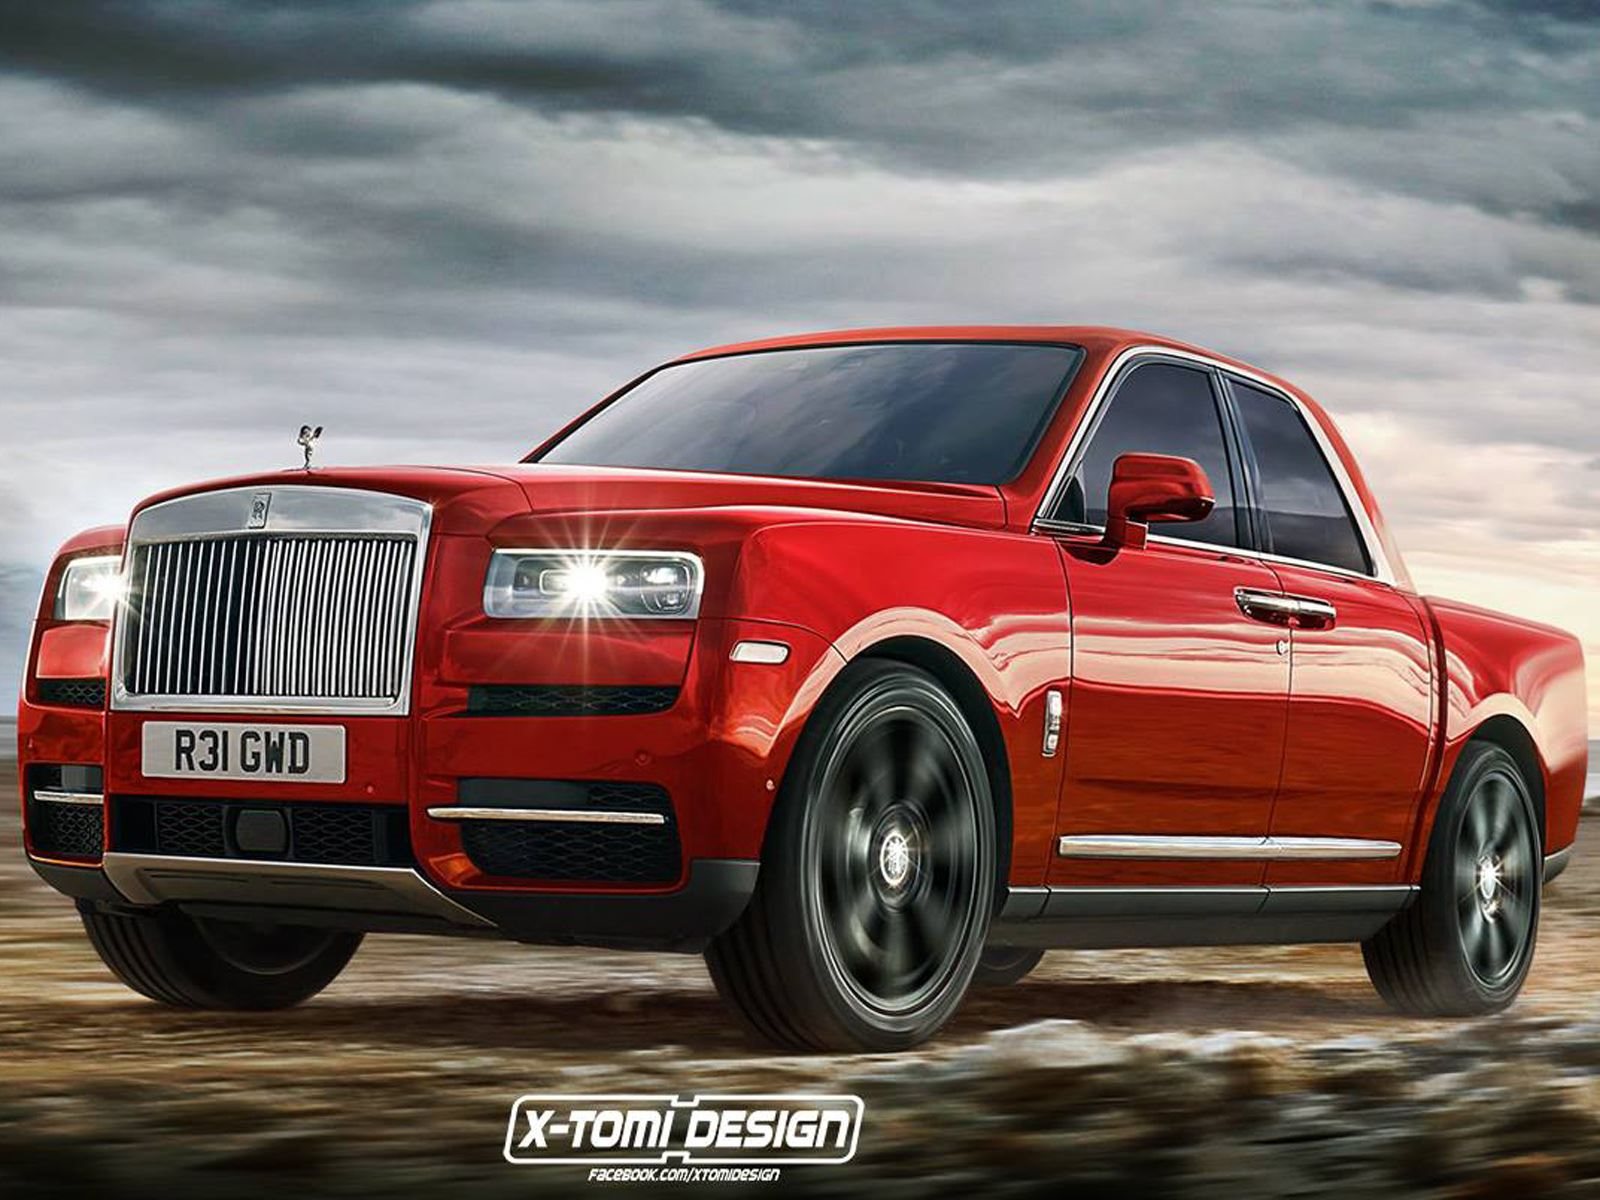 Would You Buy Rolls-Royce's Cullinan SUV If It Looked Like This?